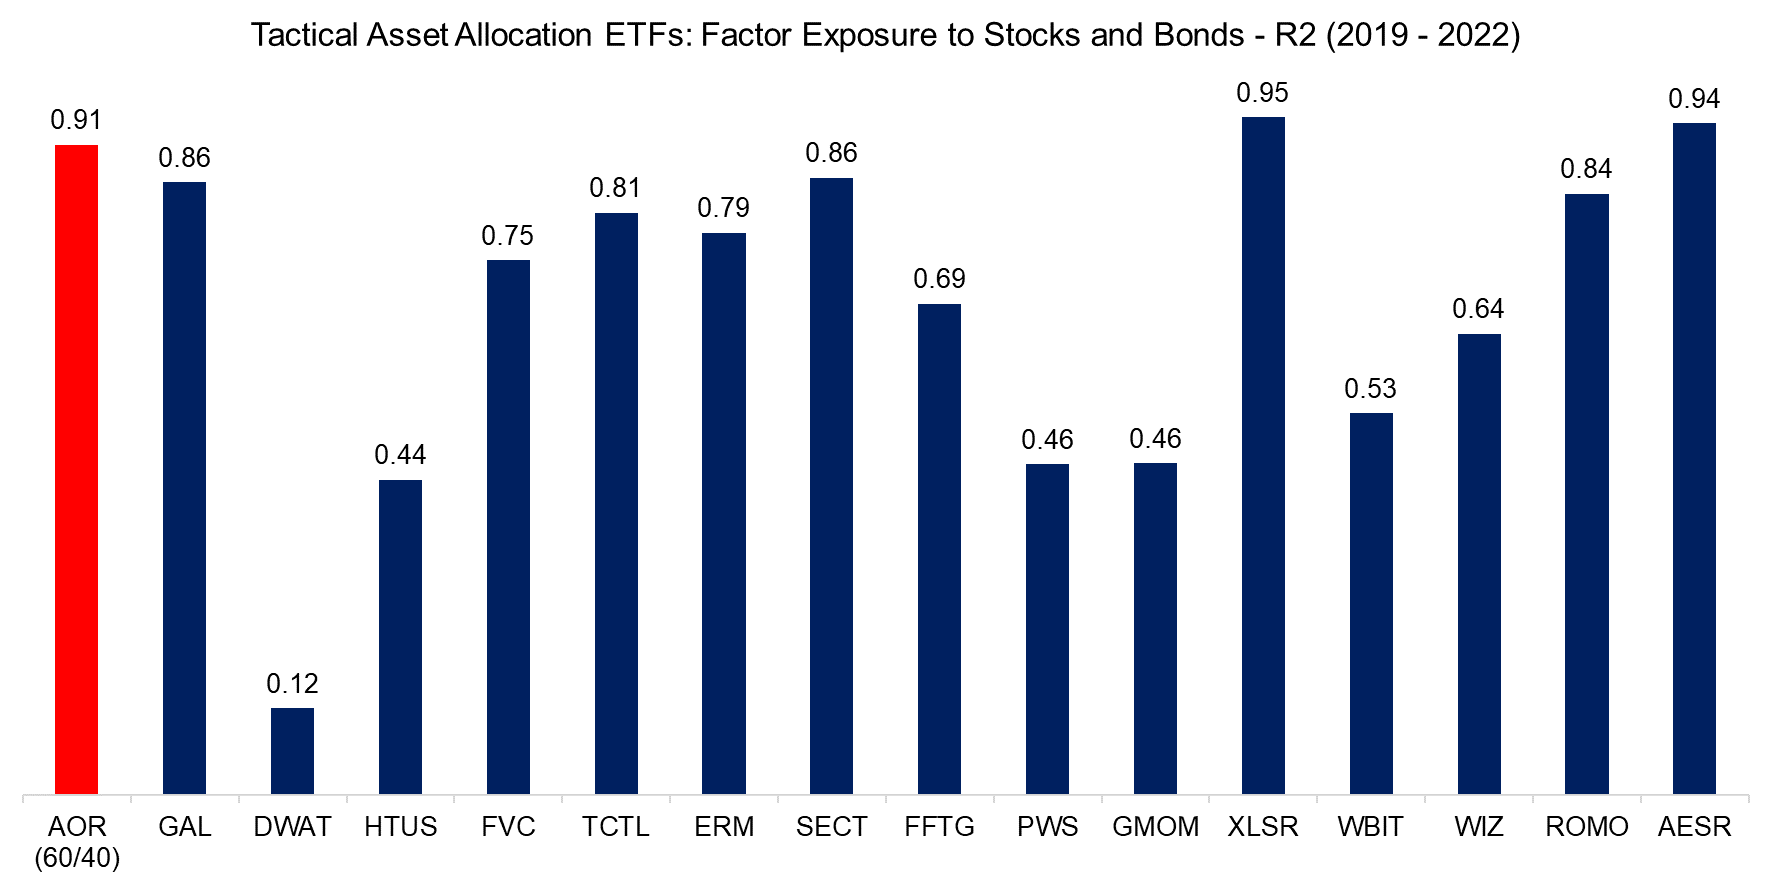 Tactical Asset Allocation ETFs Factor Exposure to Stocks and Bonds - R2 (2019 - 2022)